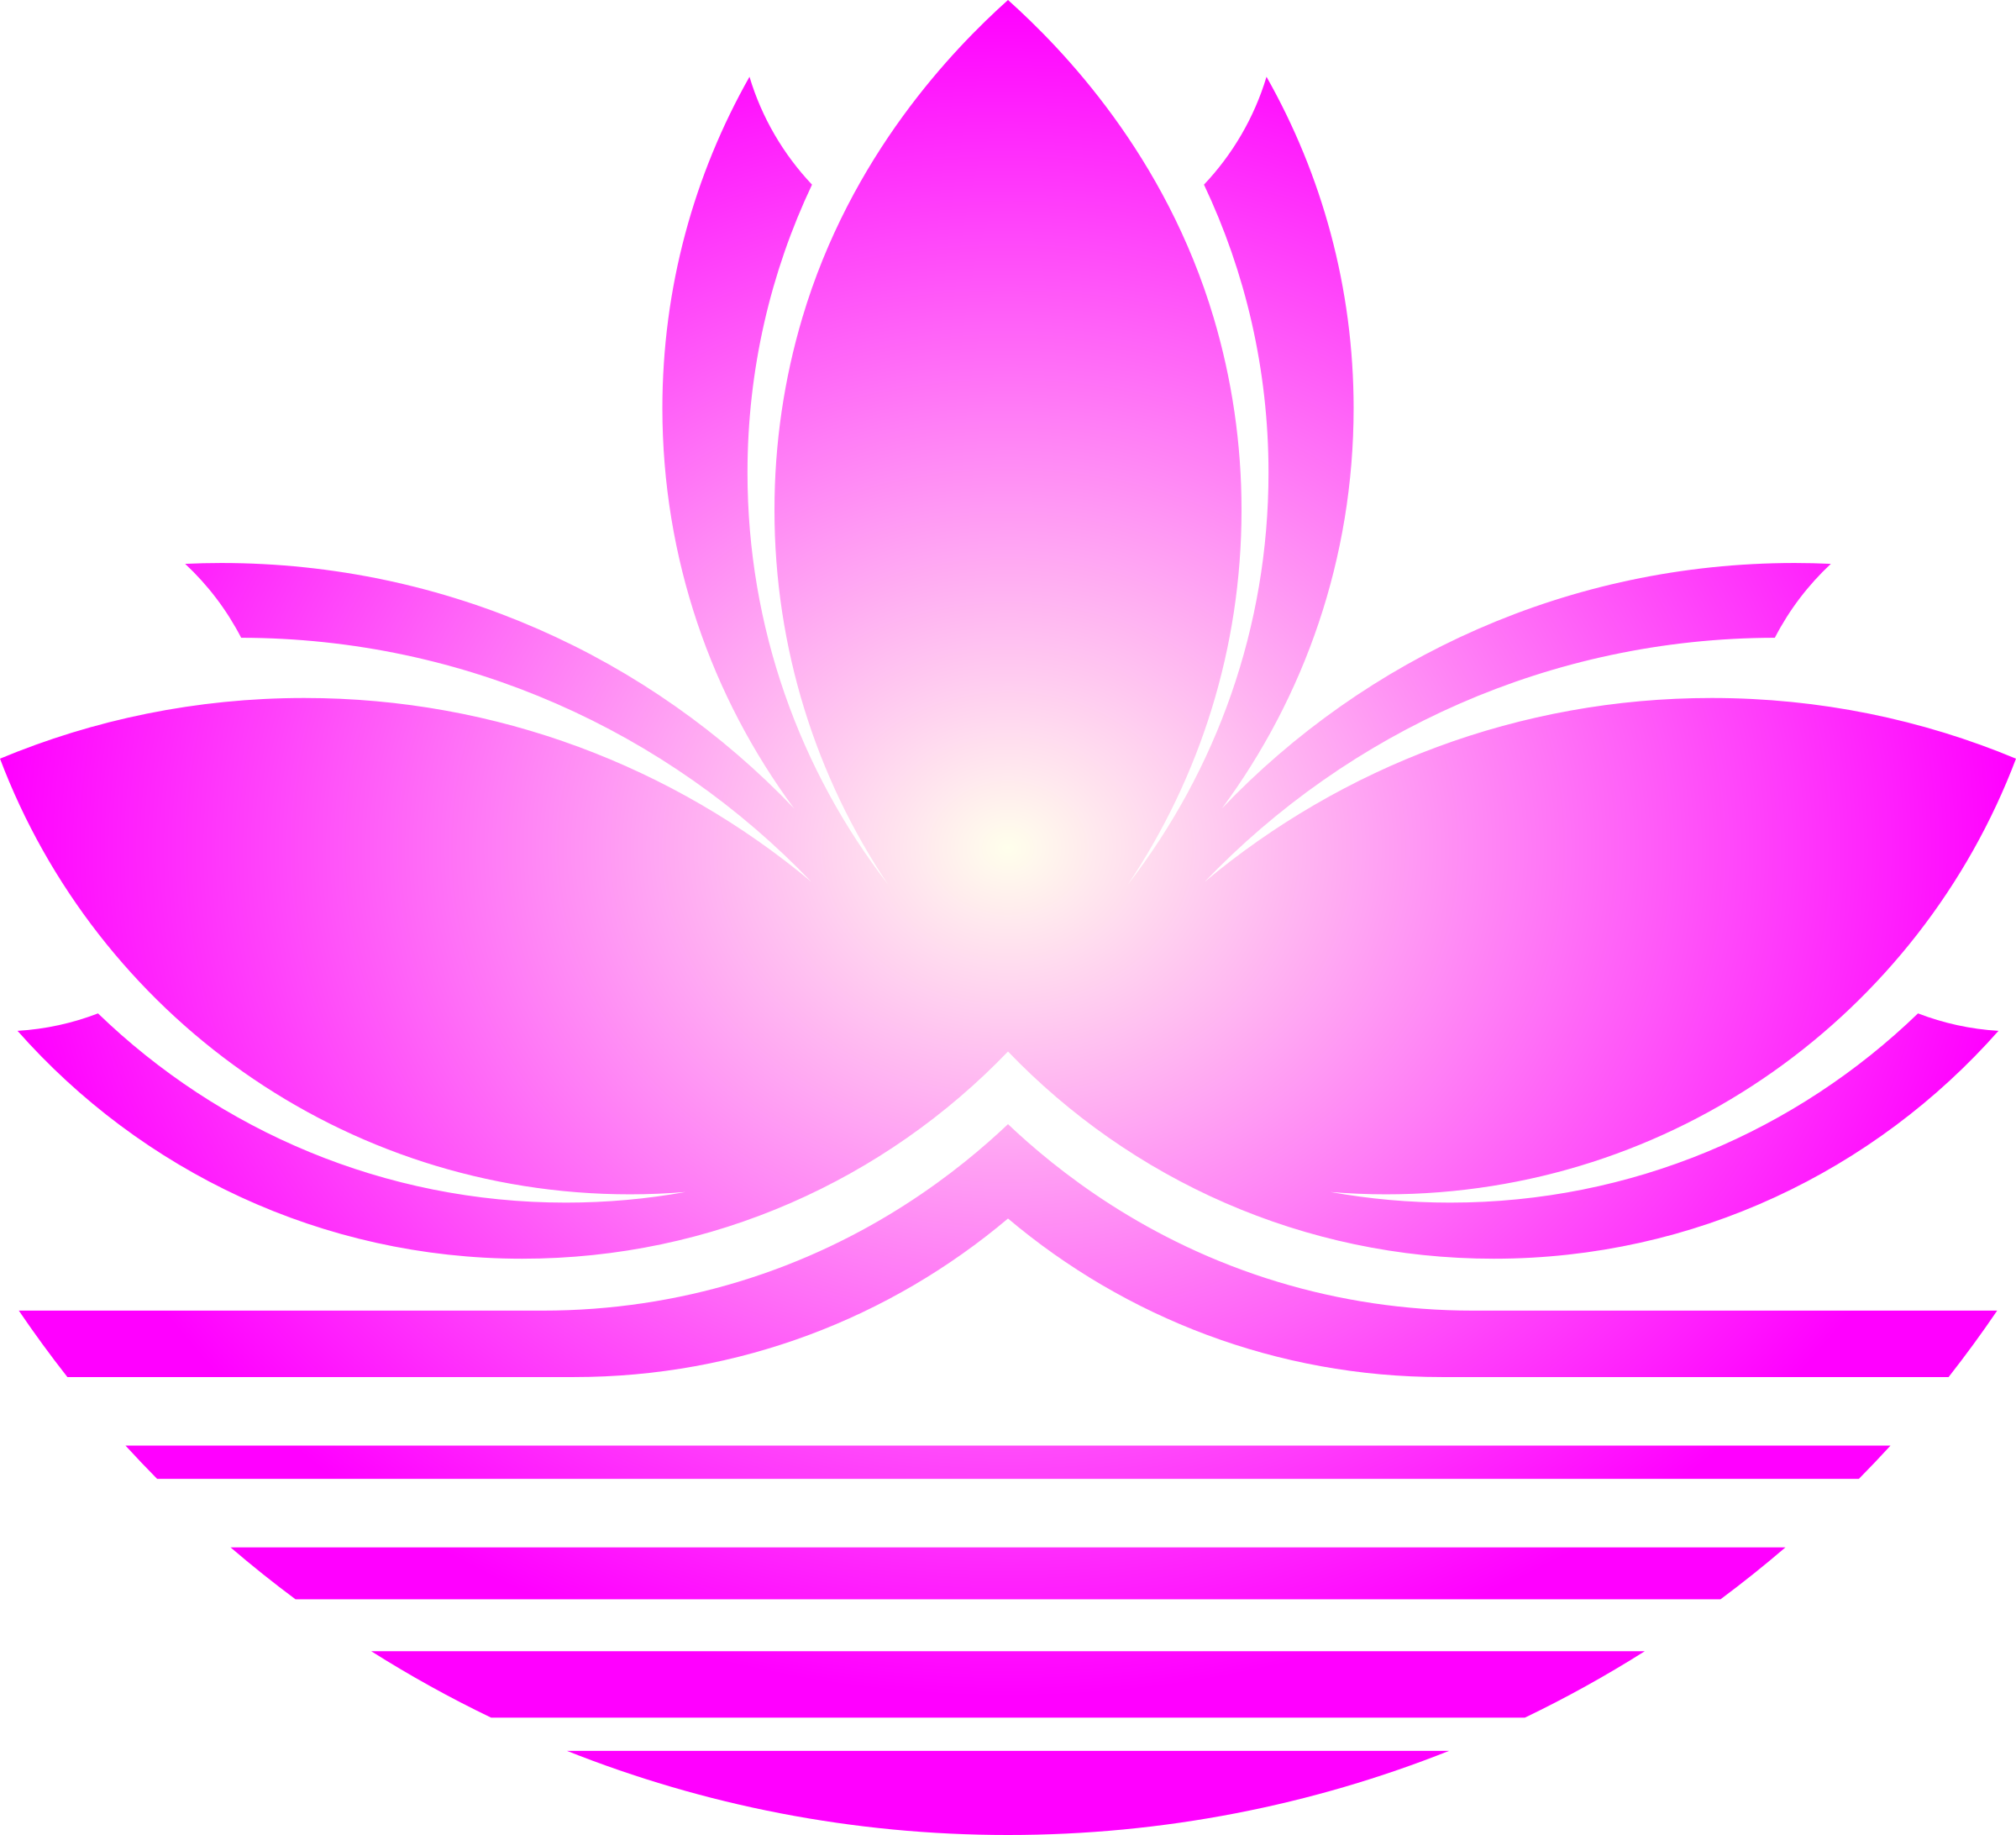 flowers clipart pink lotus